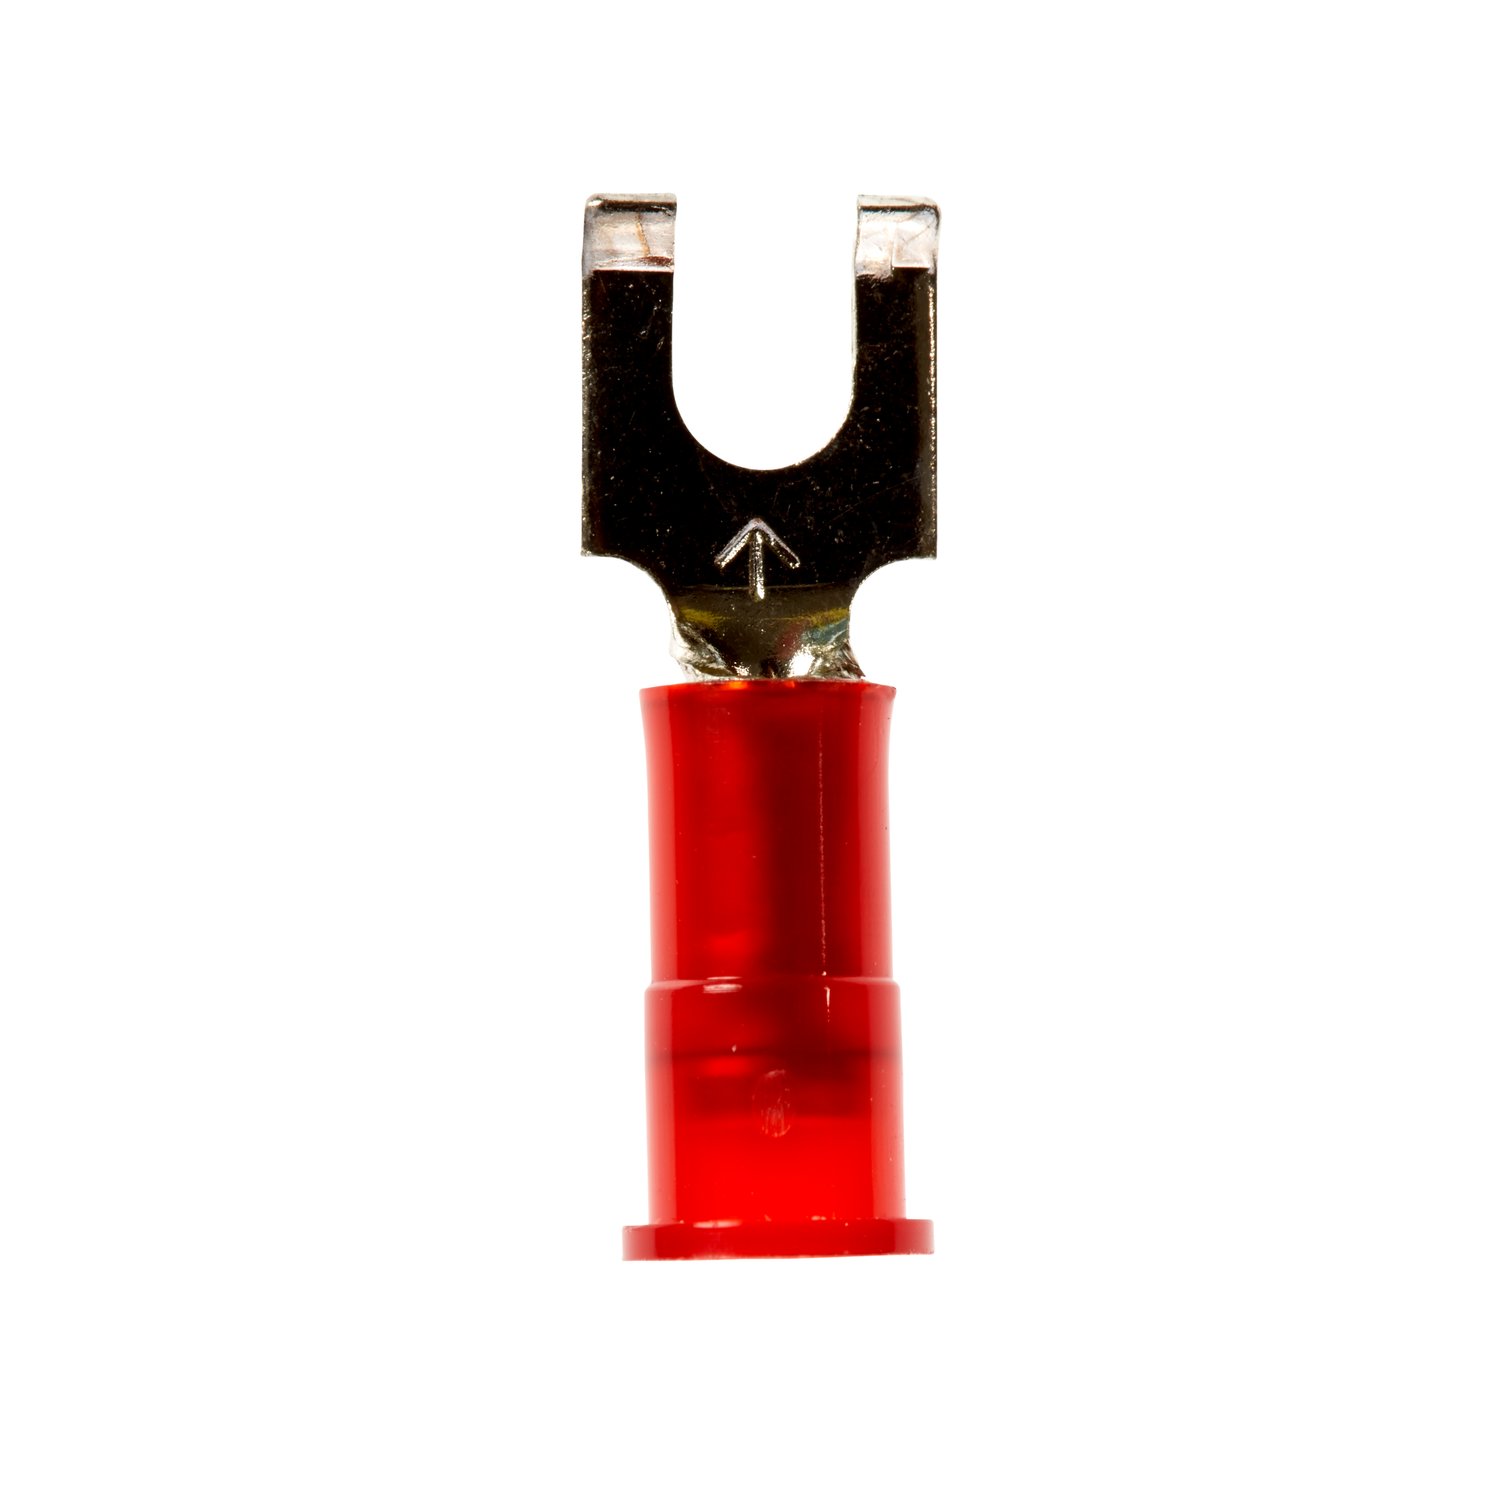 7000133278 - 3M Scotchlok Block Fork Nylon Insulated, 100/bottle, MNG18-6FBX,
suitable for use in a terminal block, 500/Case